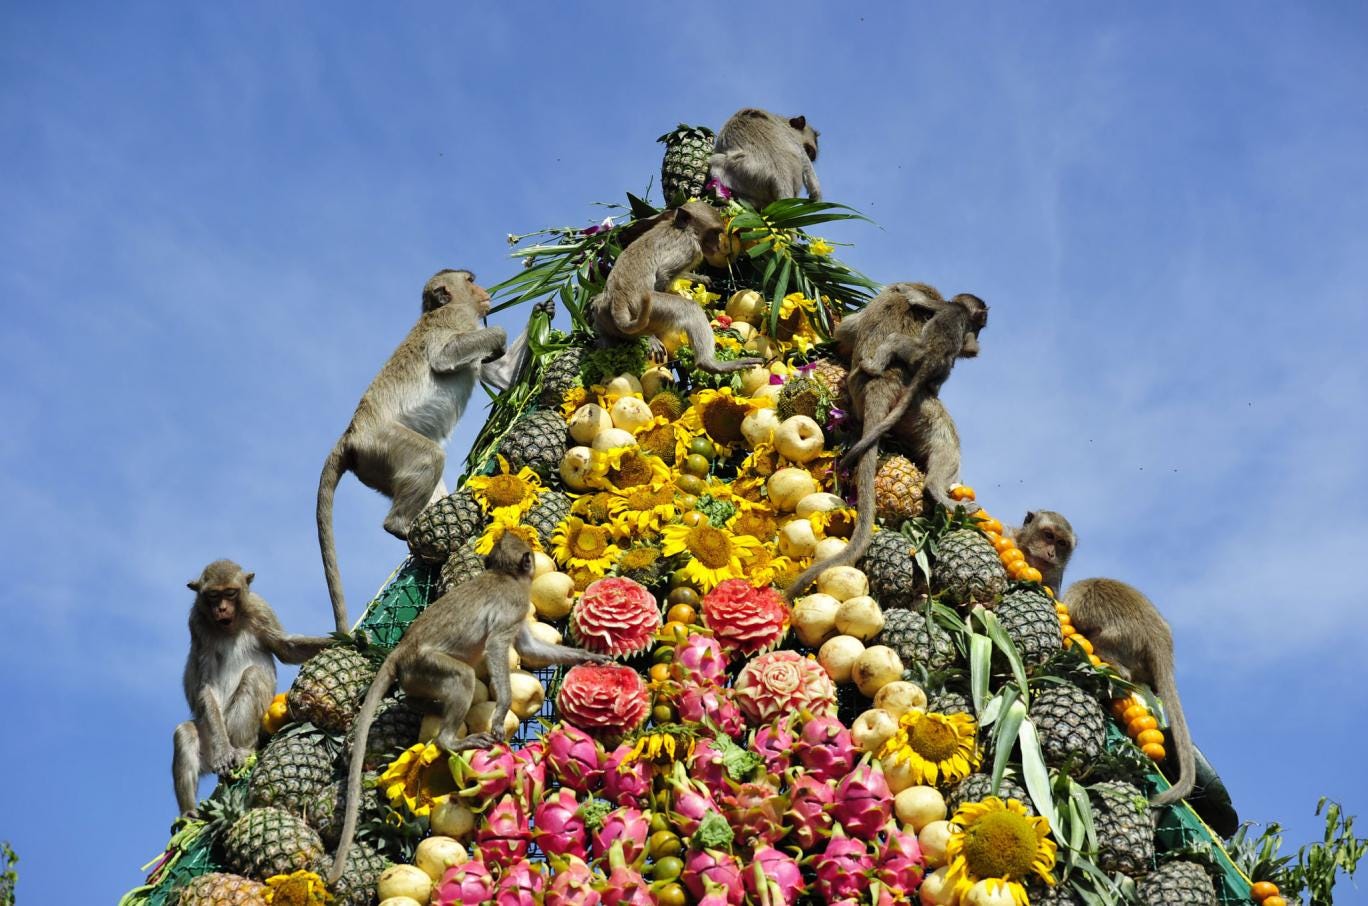 Natthawat Wongrat Photographs the Annual Feast of Lopburi’s Crab-eating Macaques